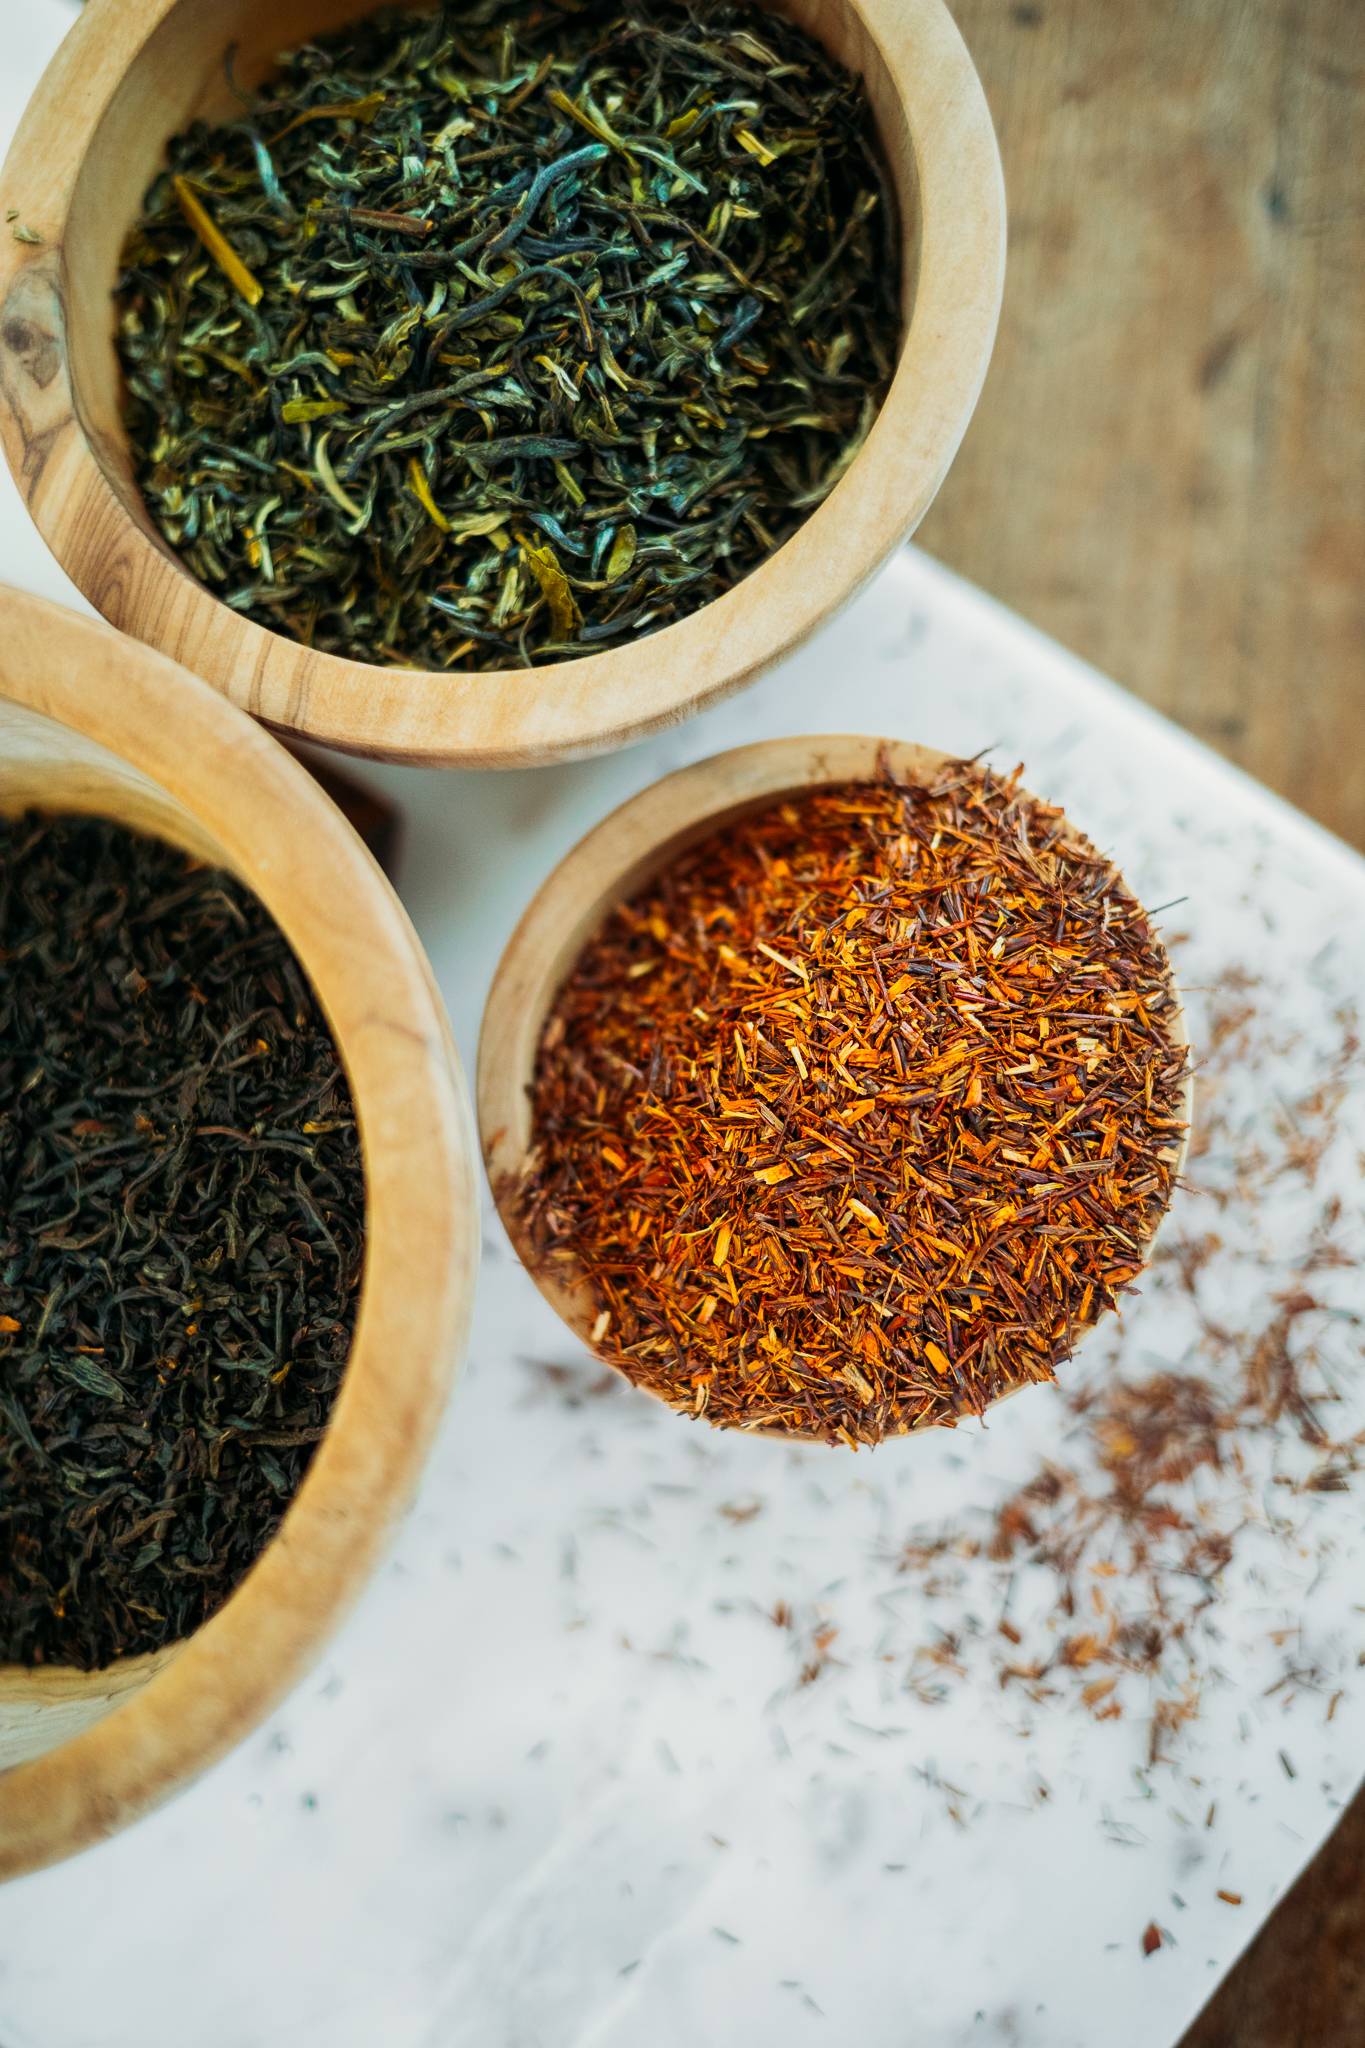 4 Common Types of Tea To Know & How To Use Them | Herbal Academy | Learn about four different but common teas, including black, green, white, and herbal teas, as well as various ways to use and enjoy these types of tea.